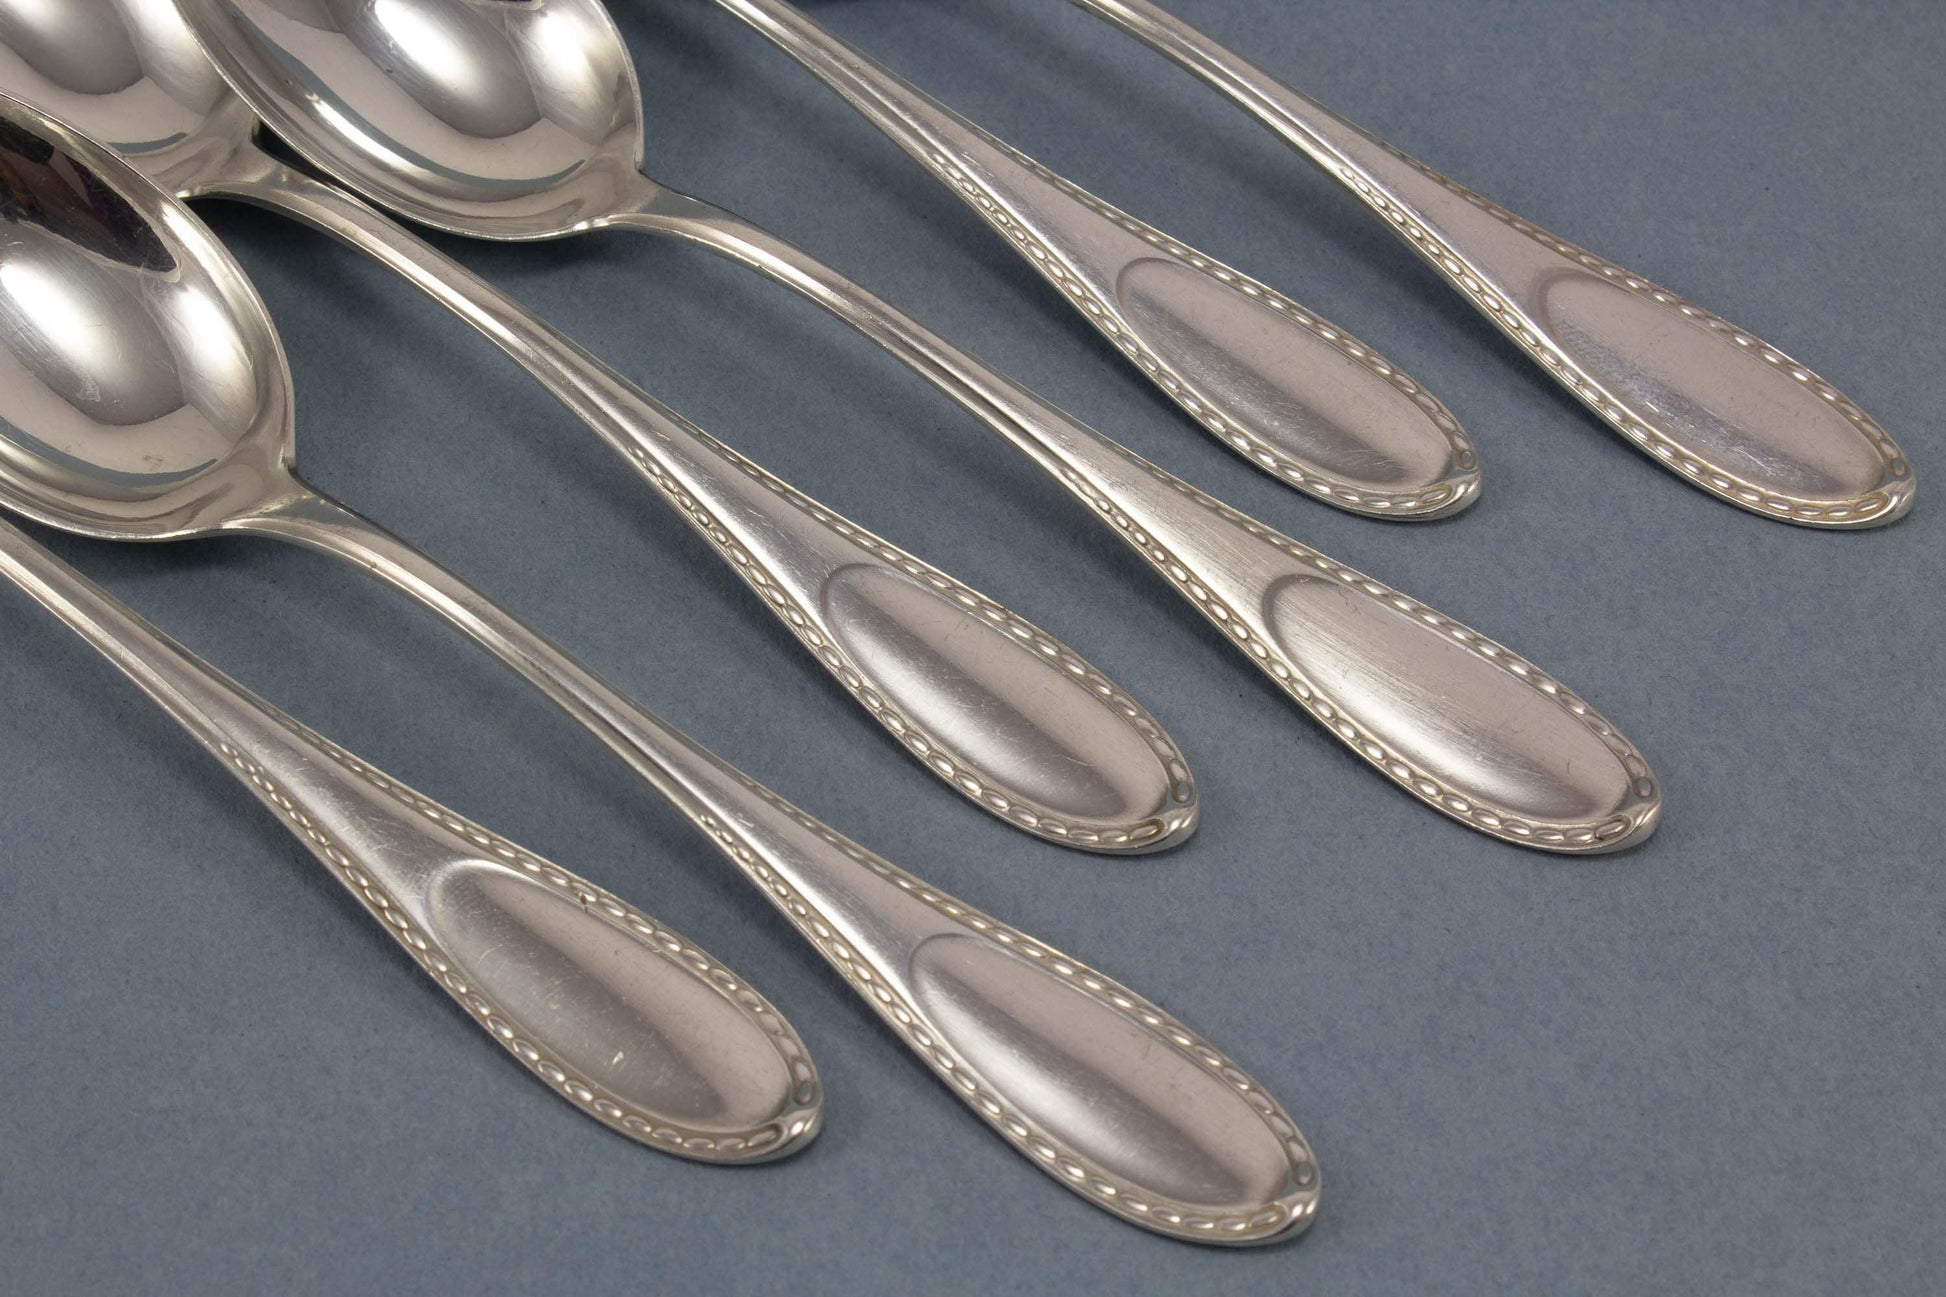 Beautiful silver tea spoons by BSF, 800 silver 